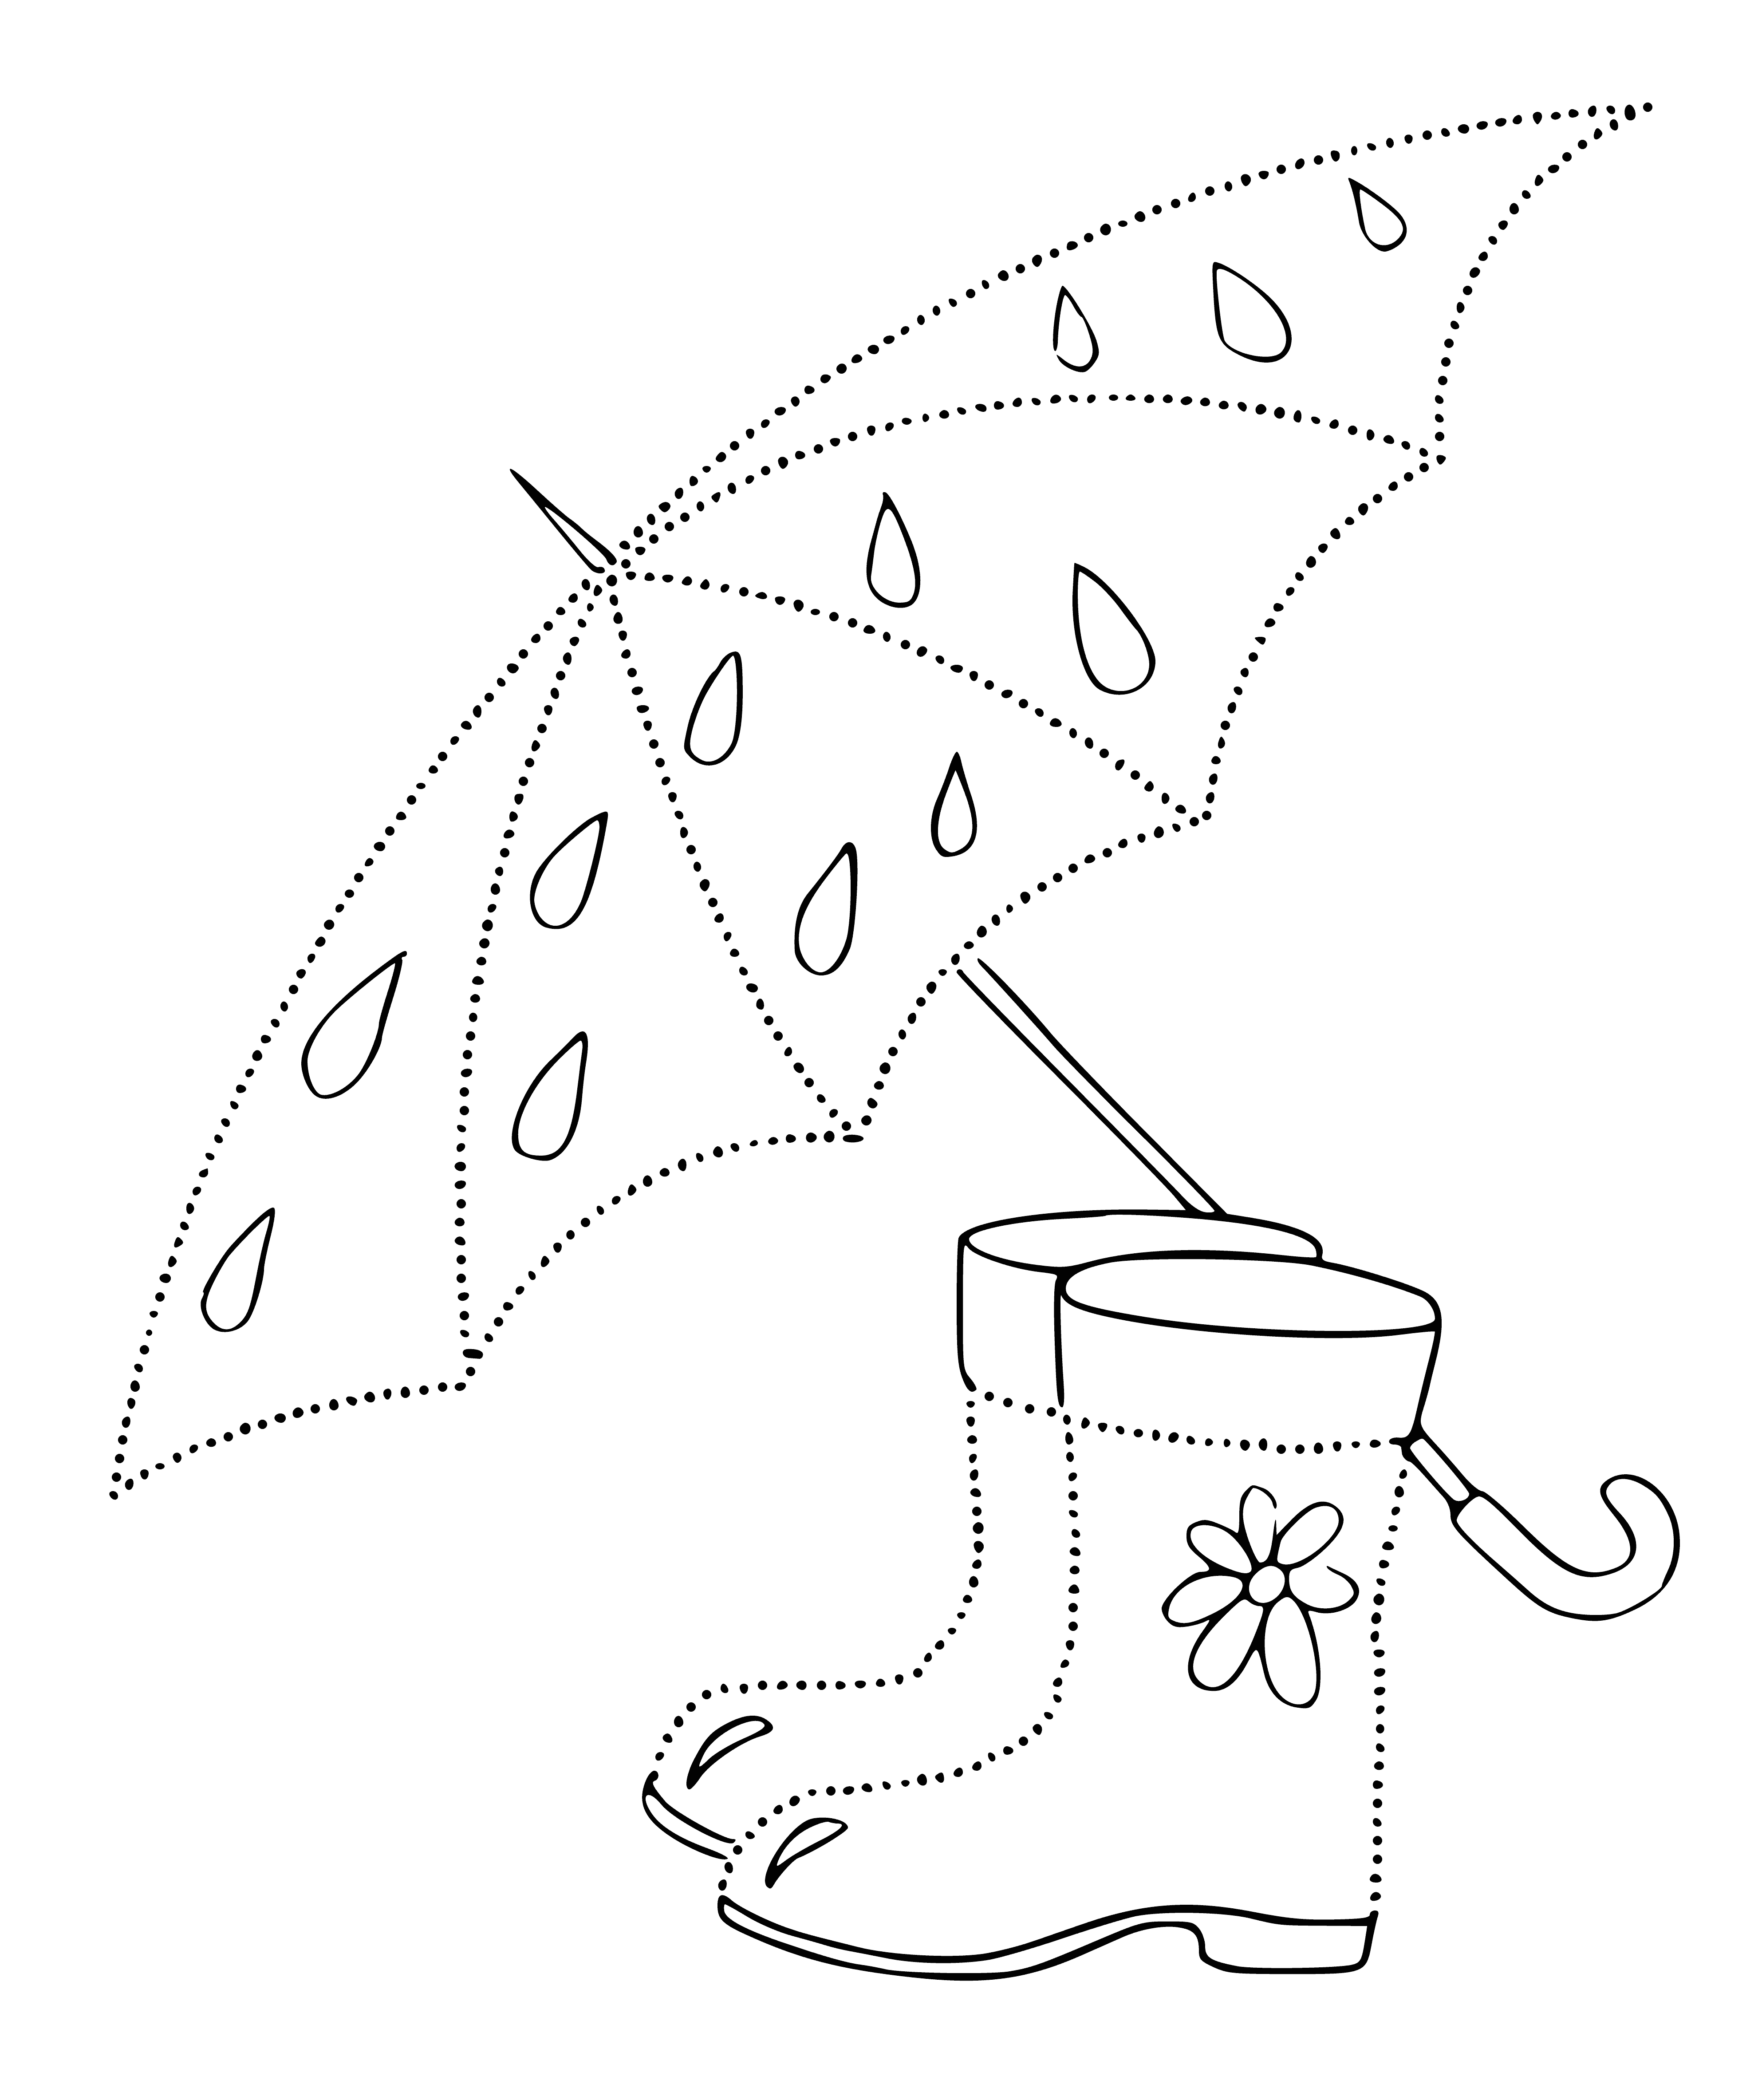 Autumn clothes coloring page